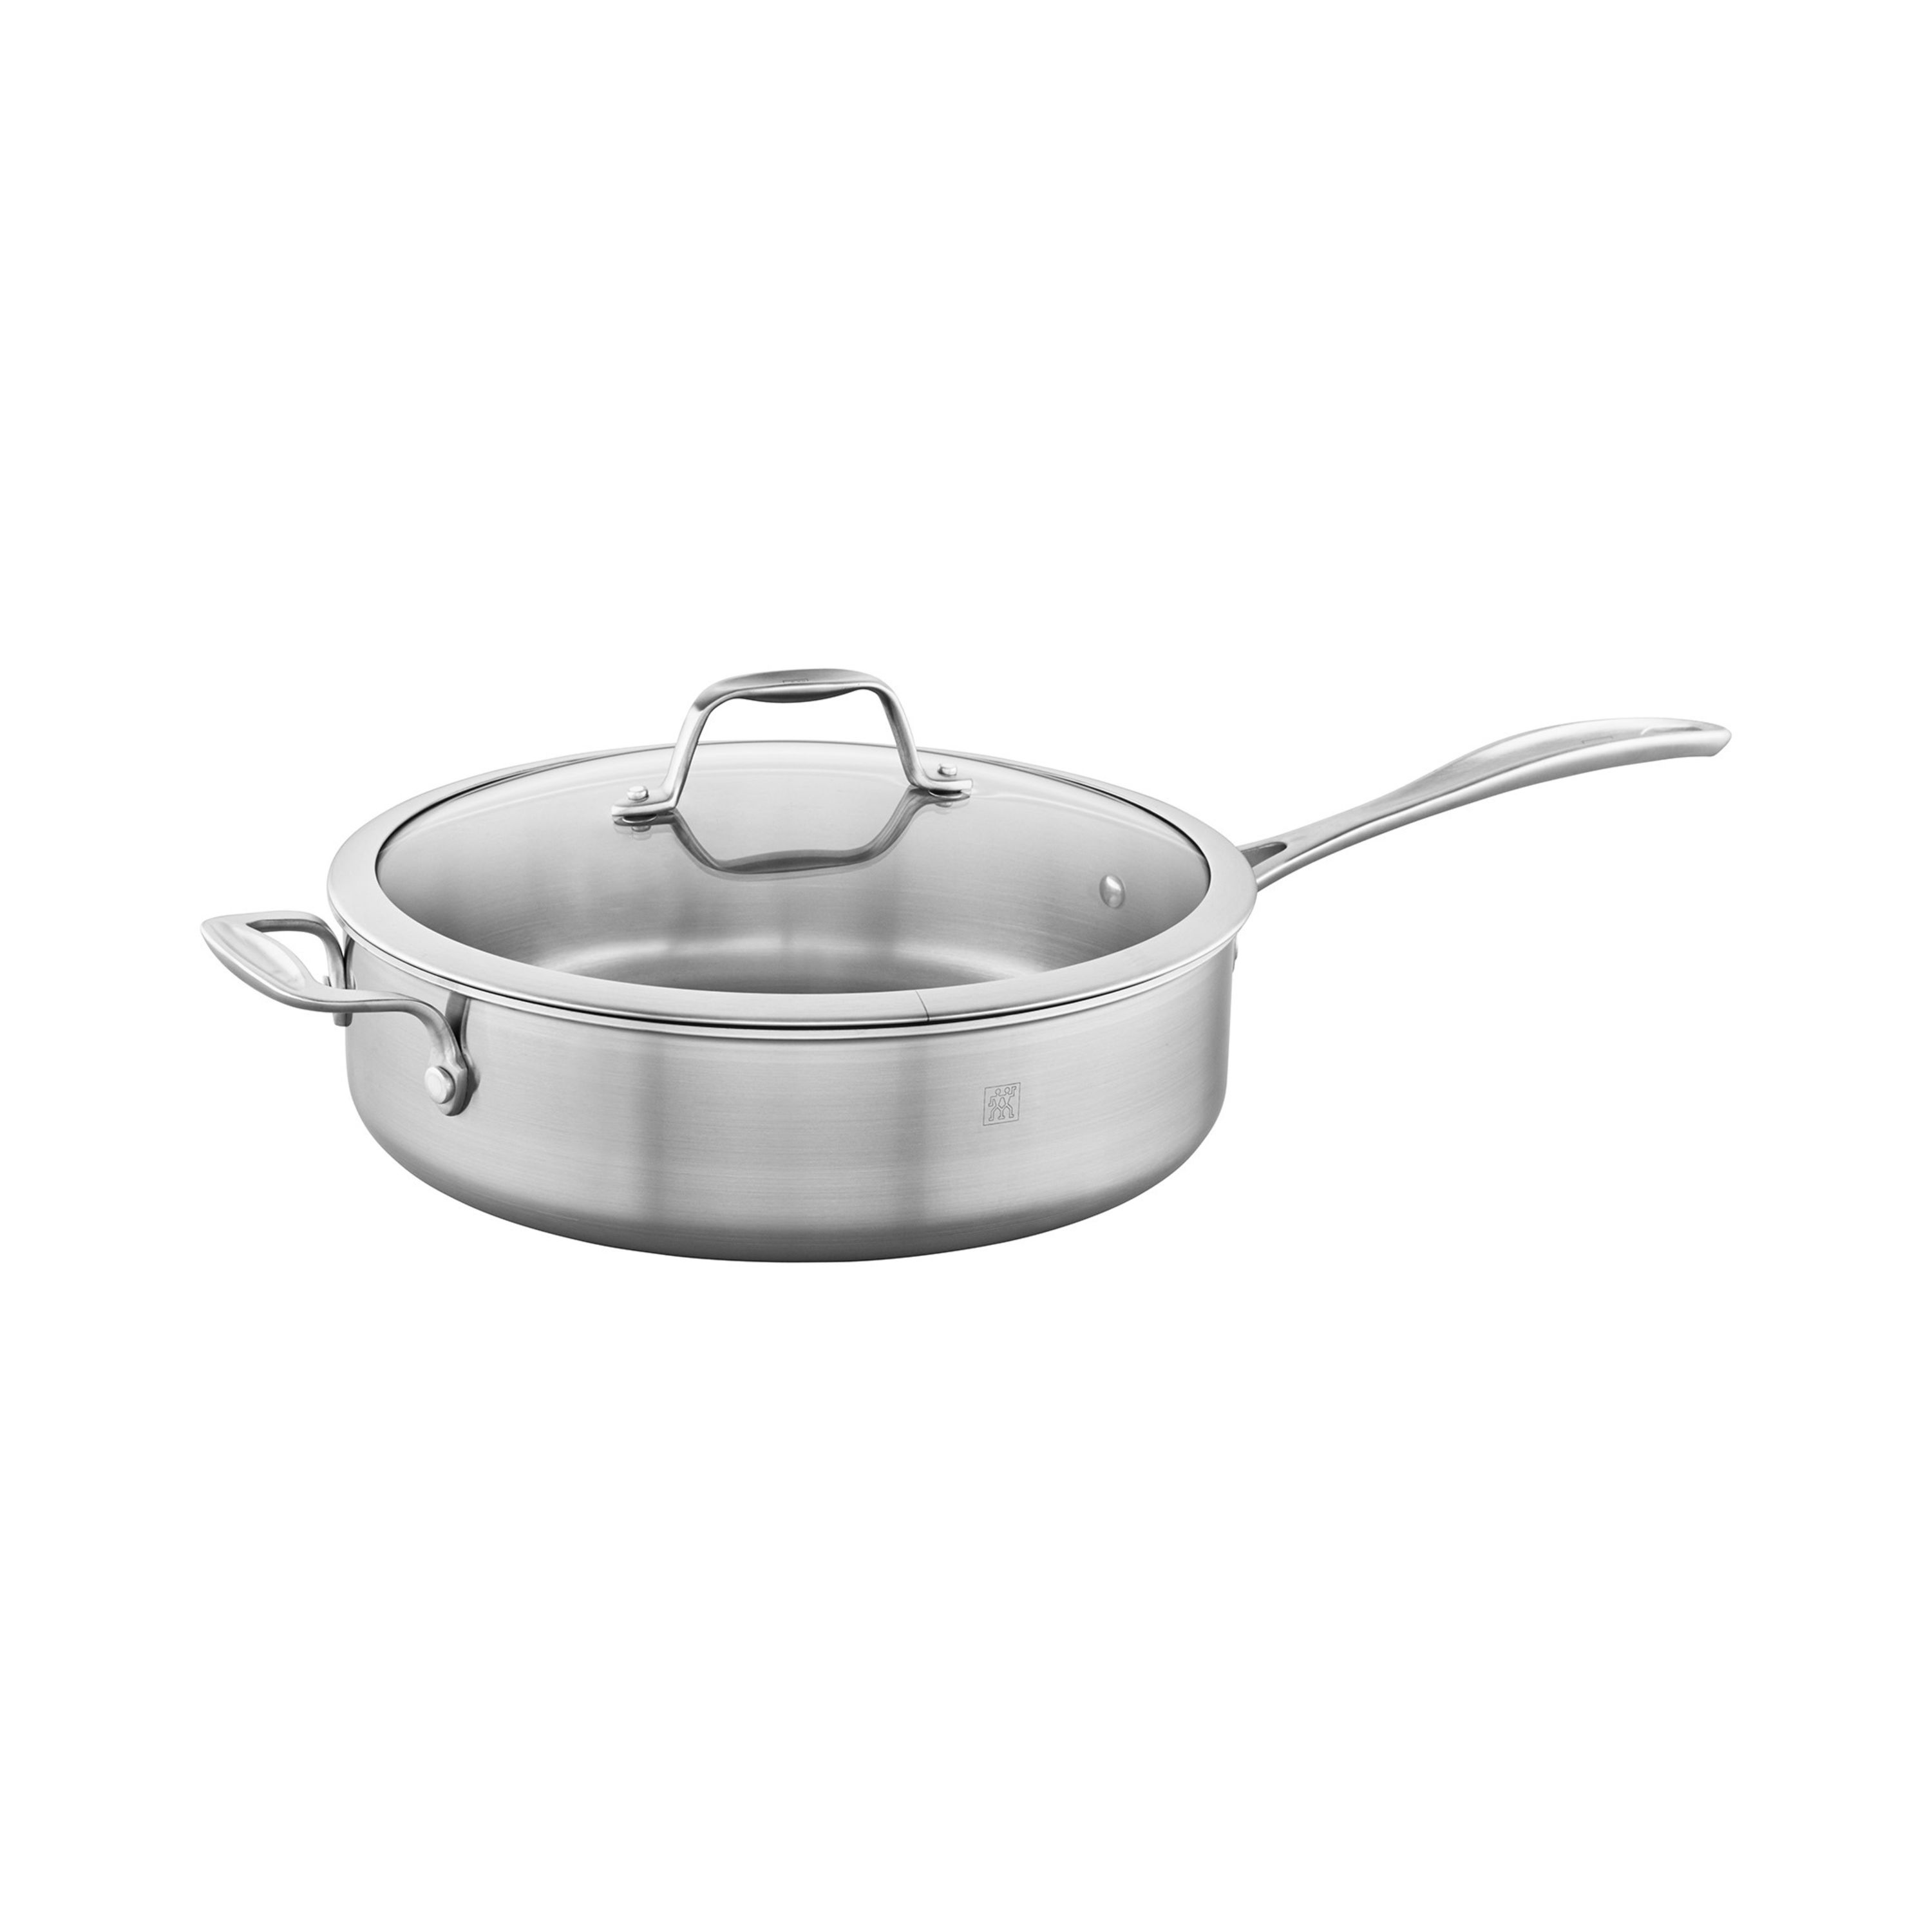 ZWILLING Spirit 3-Ply 11-inch, Stainless Steel, Saute Pan